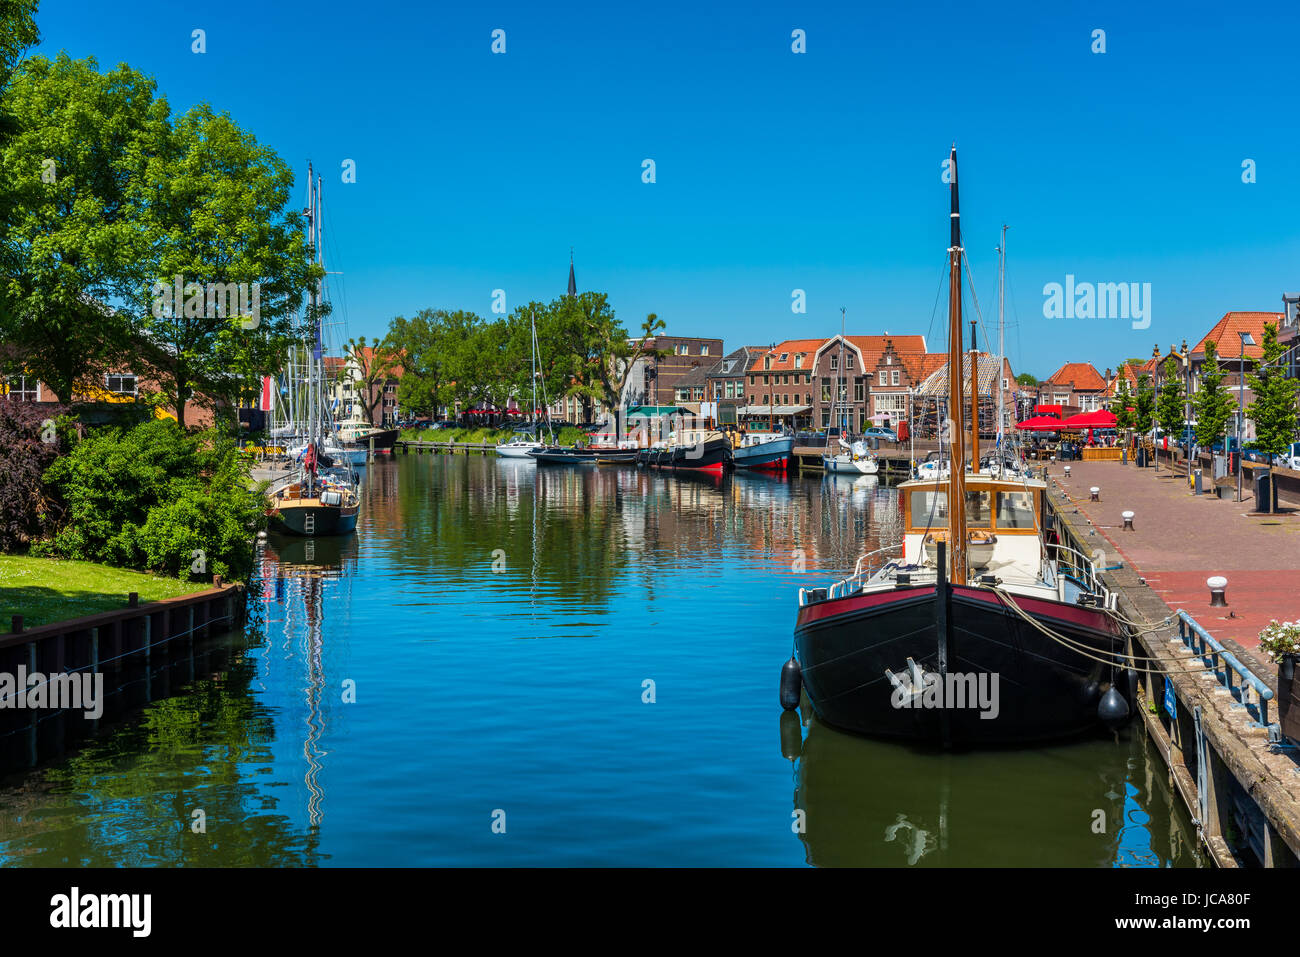 Ships in Canal in City Center of Enkhuizen Netherlands Stock Photo